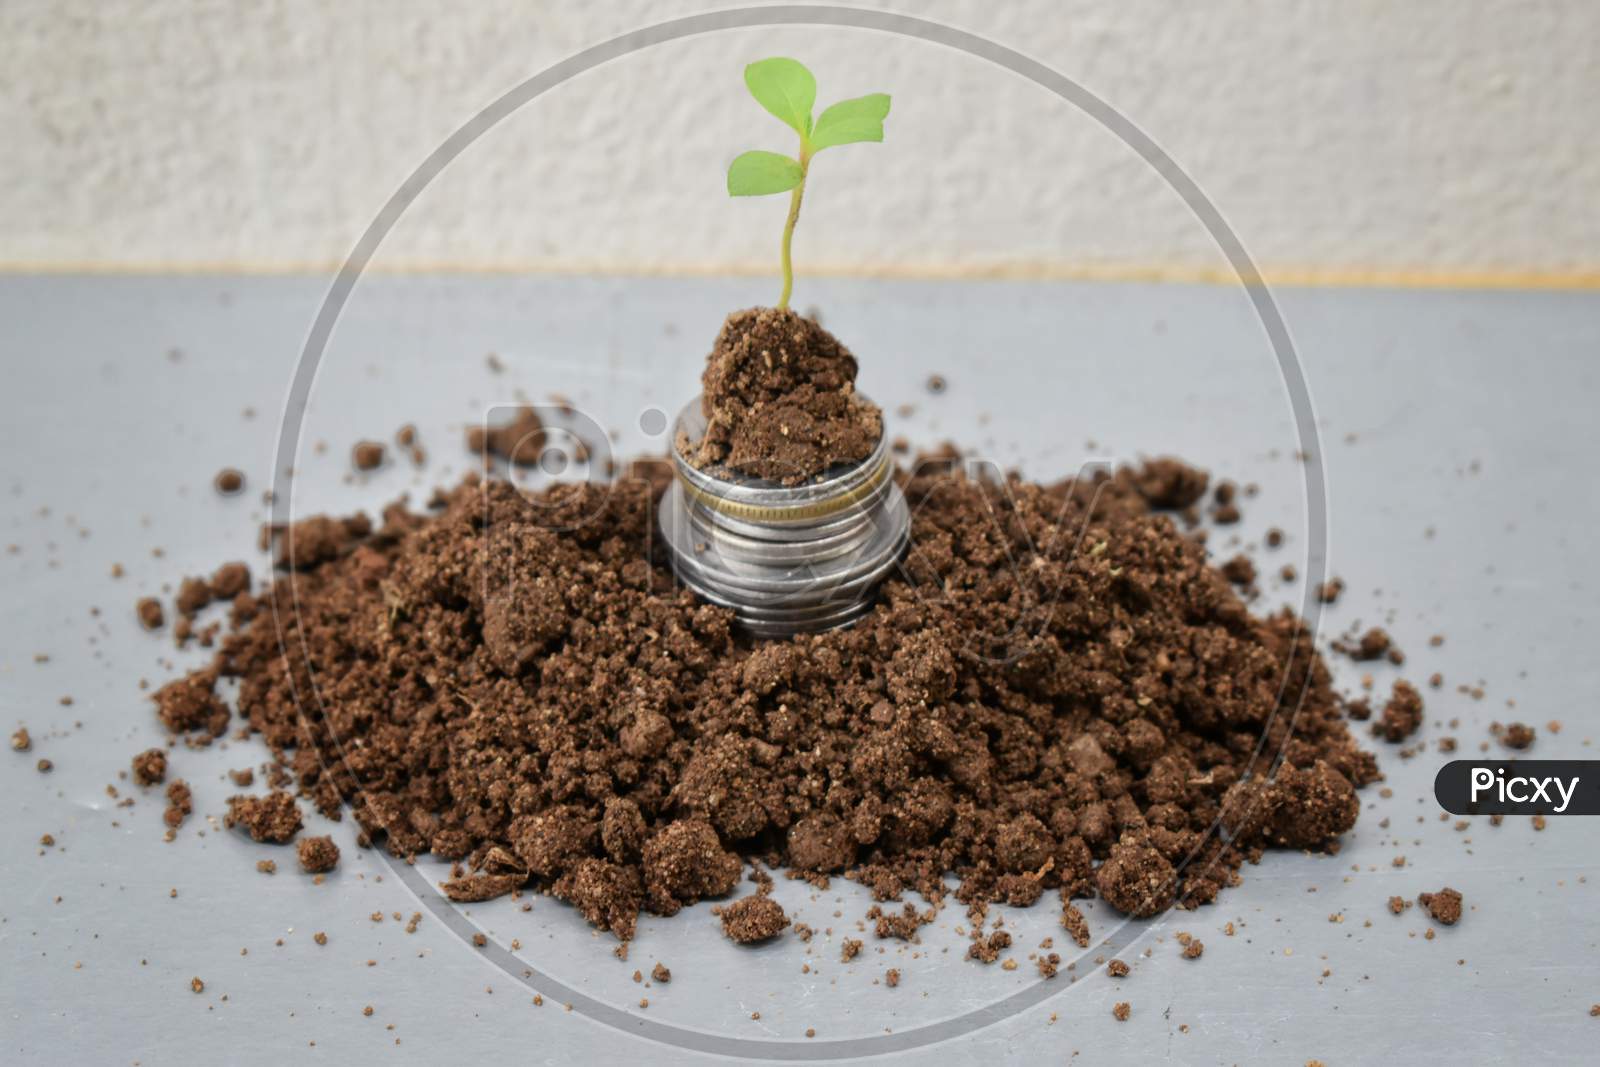 Growing Money - Plant On Coins - Finance And Investment Concept, India.